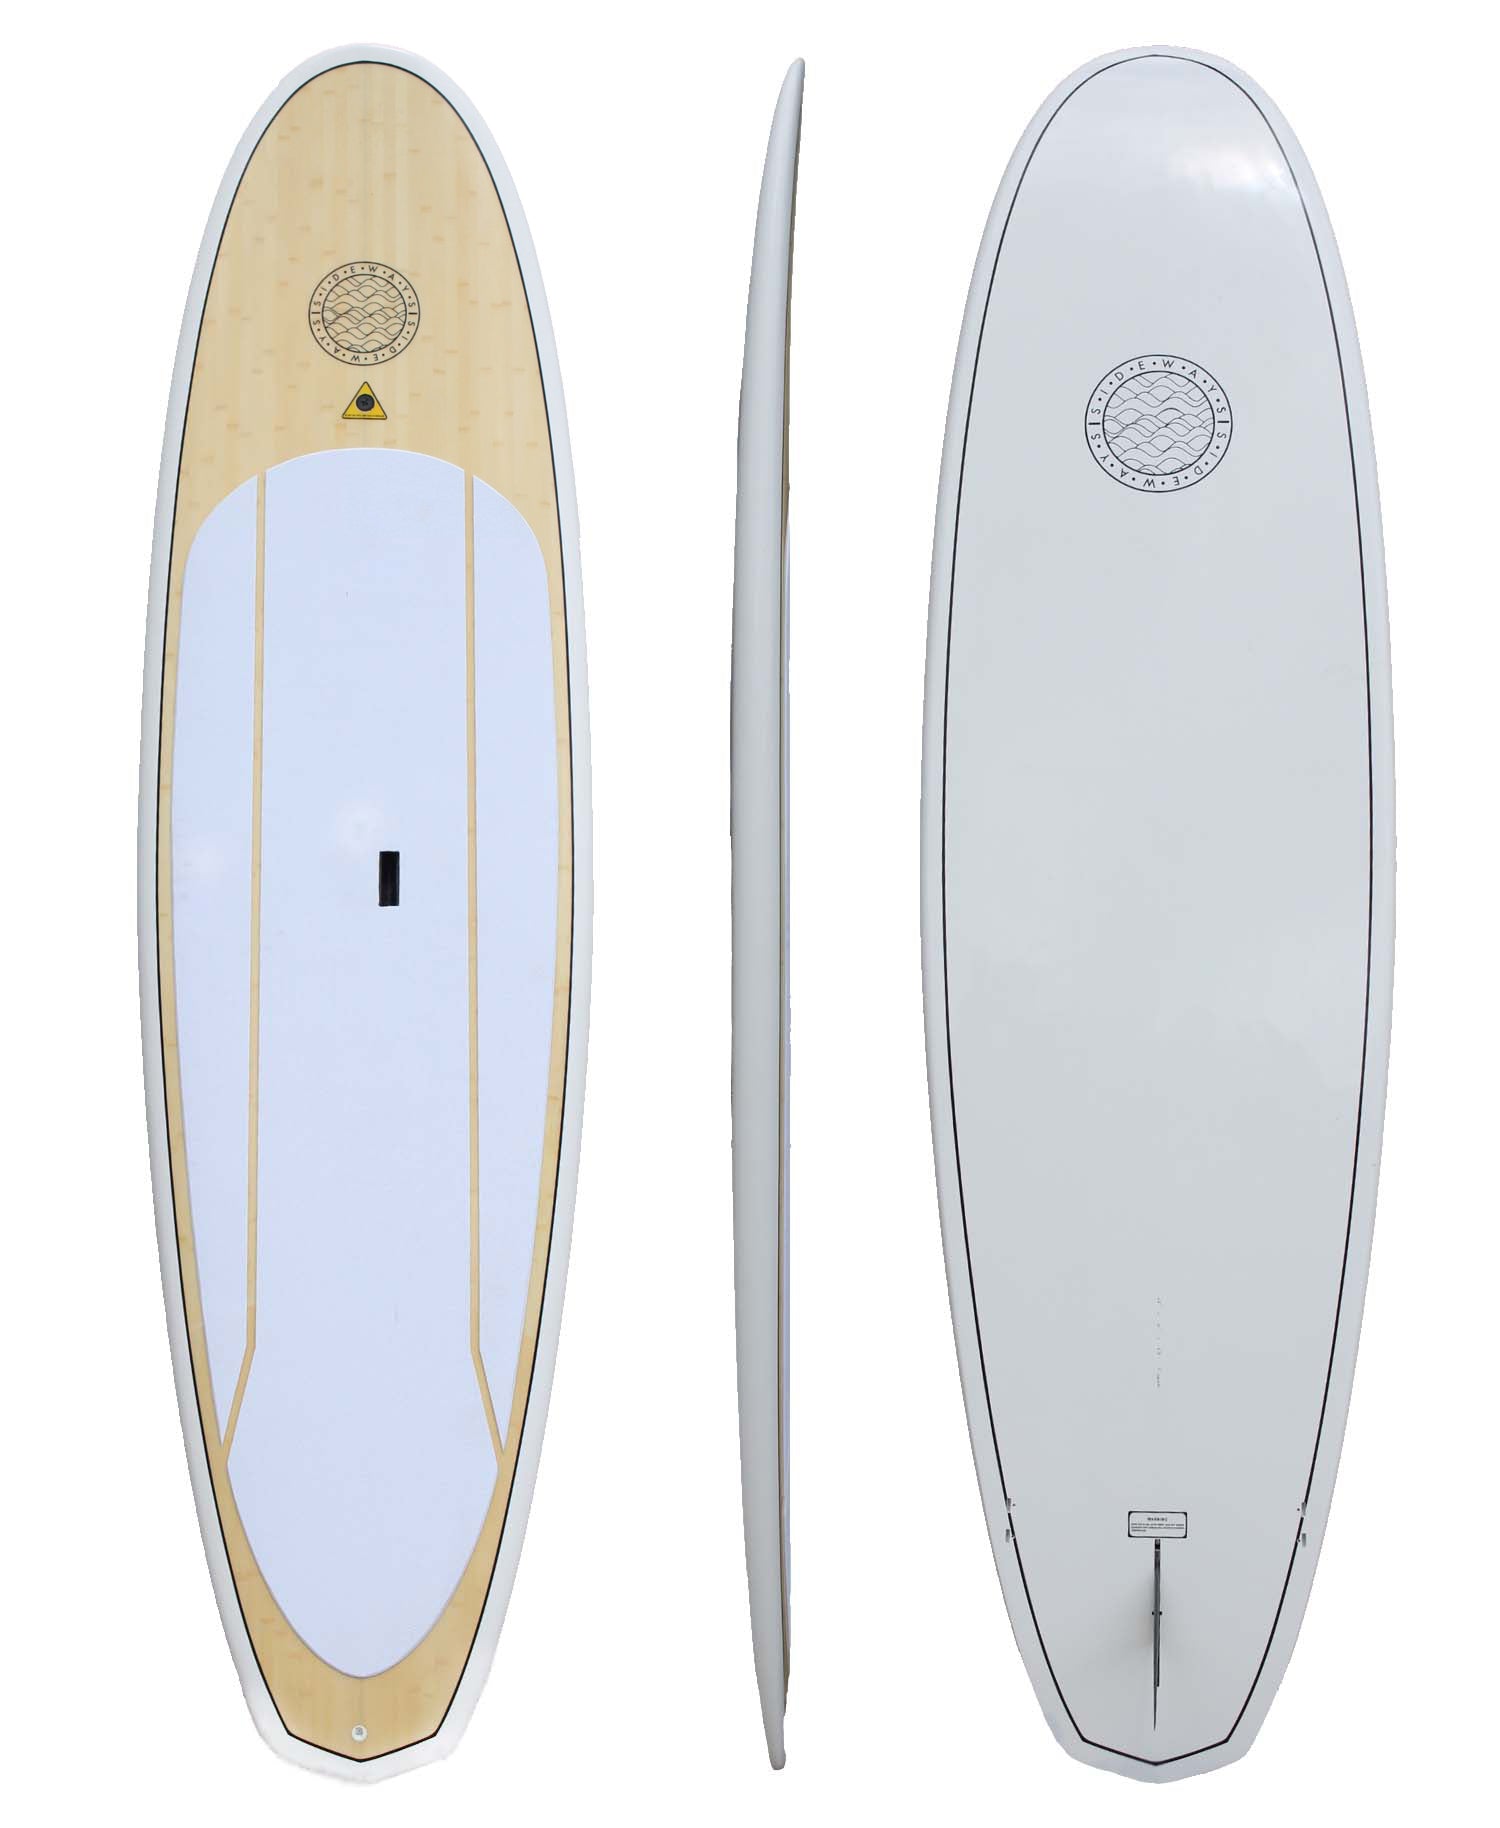 SIDEWAYS "CRUISER" STAND UP PADDLE BOARD